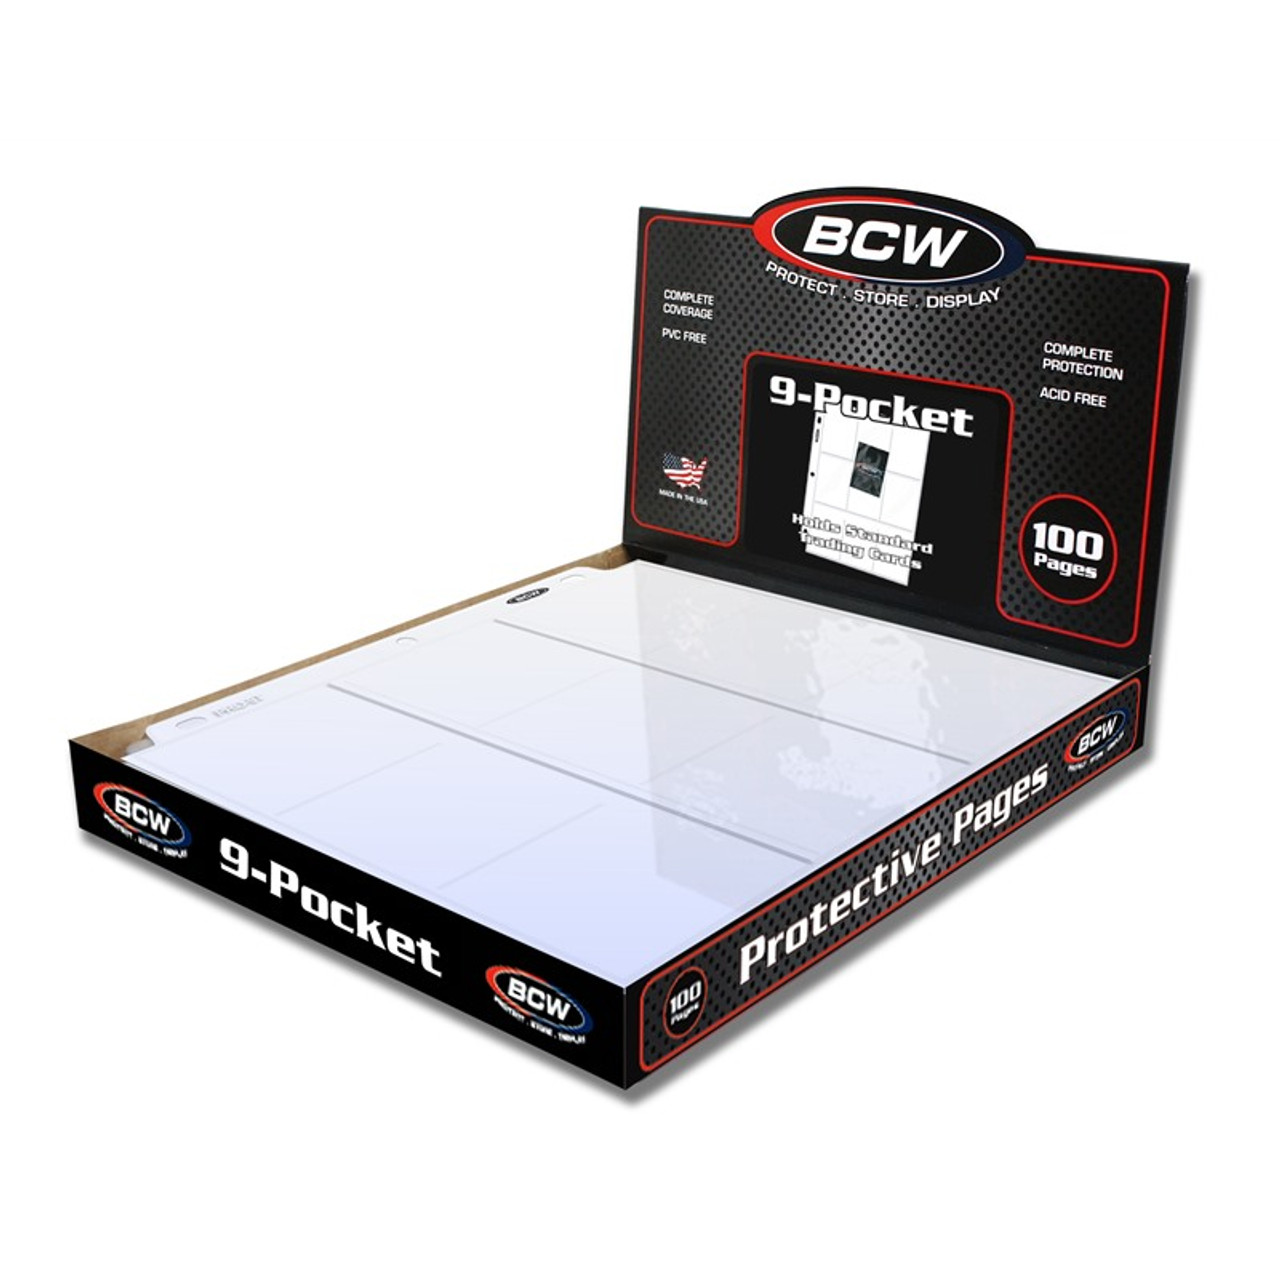 BCW Pro 9-Pocket Pages 100ct Box / Case of 10